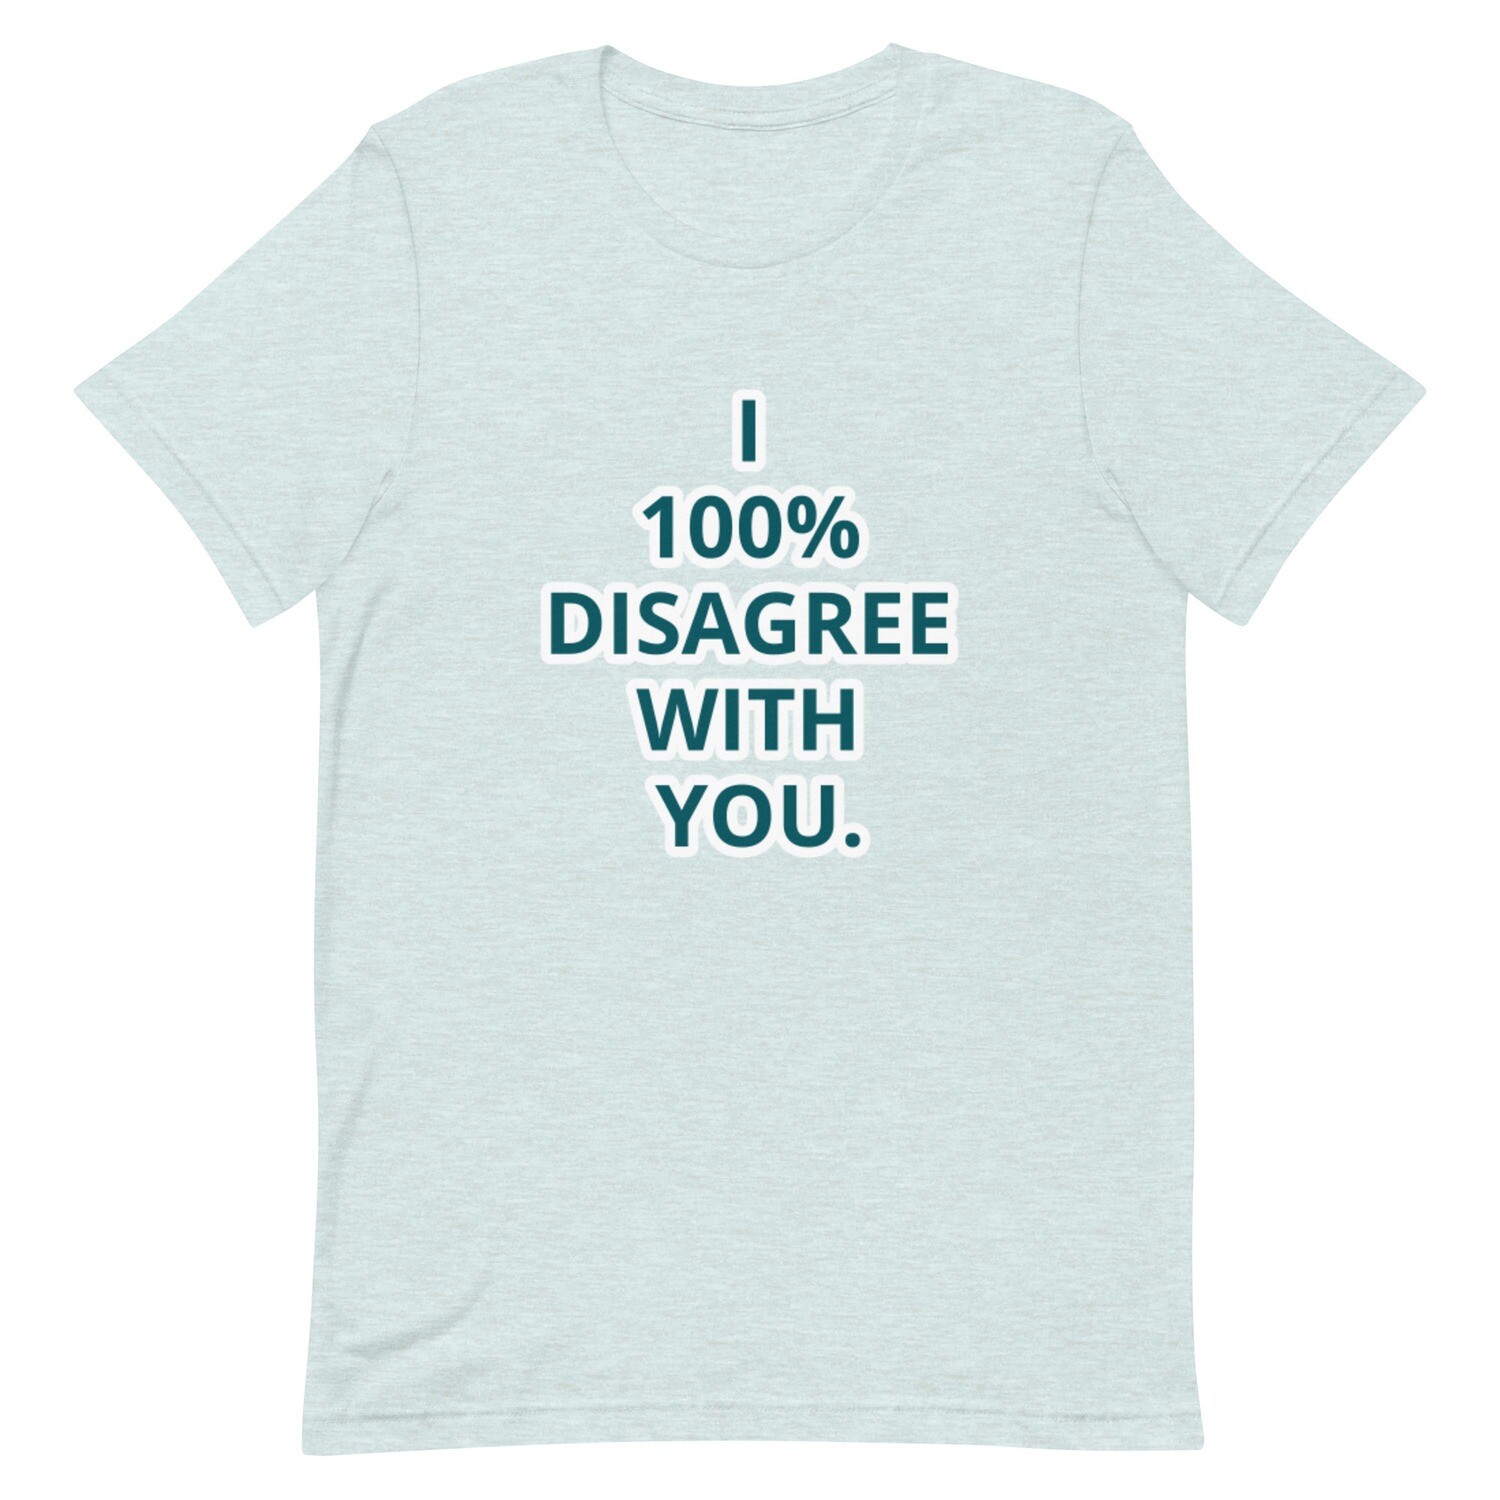 I 100% DISAGREE WITH YOU. T-Shirt (Choose Colour)